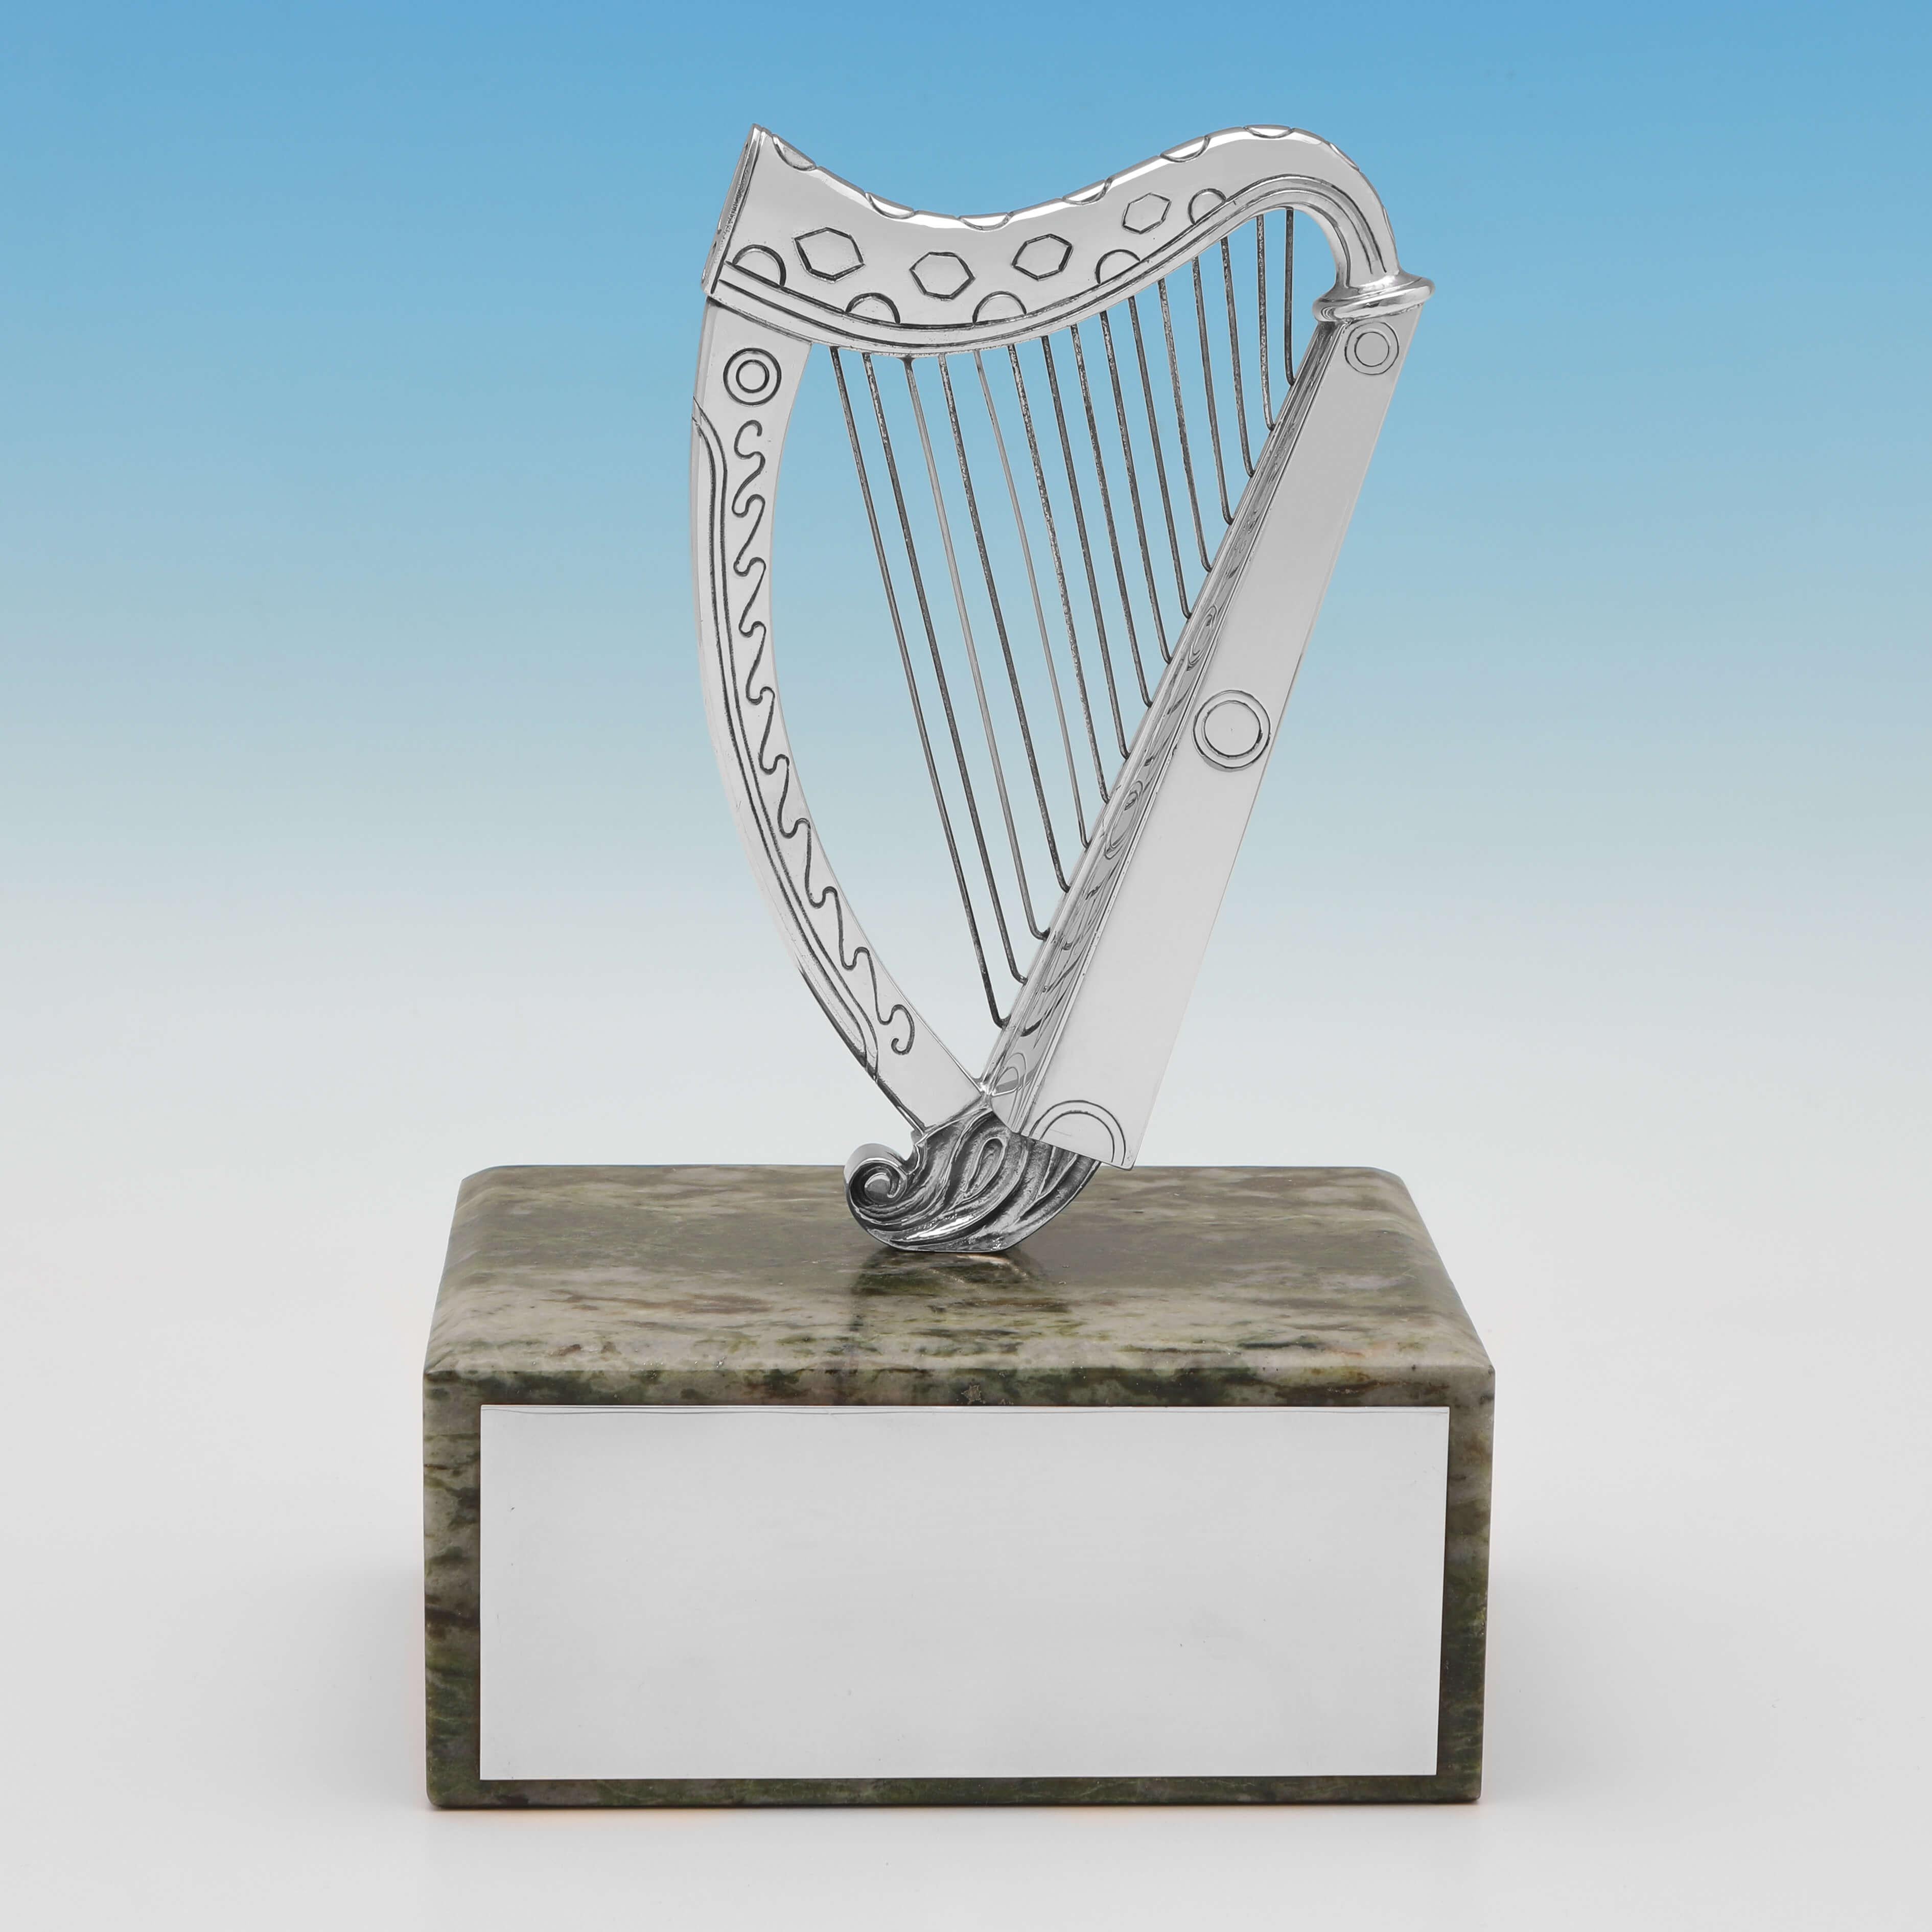 Hallmarked in London in 1970 by Barnards, this charming, Sterling Silver Model of a Harp, is well modelled, and presented on a green marble base with a silver plaque for engraving. The harp is decorated with a geometric engraved design. 

It would